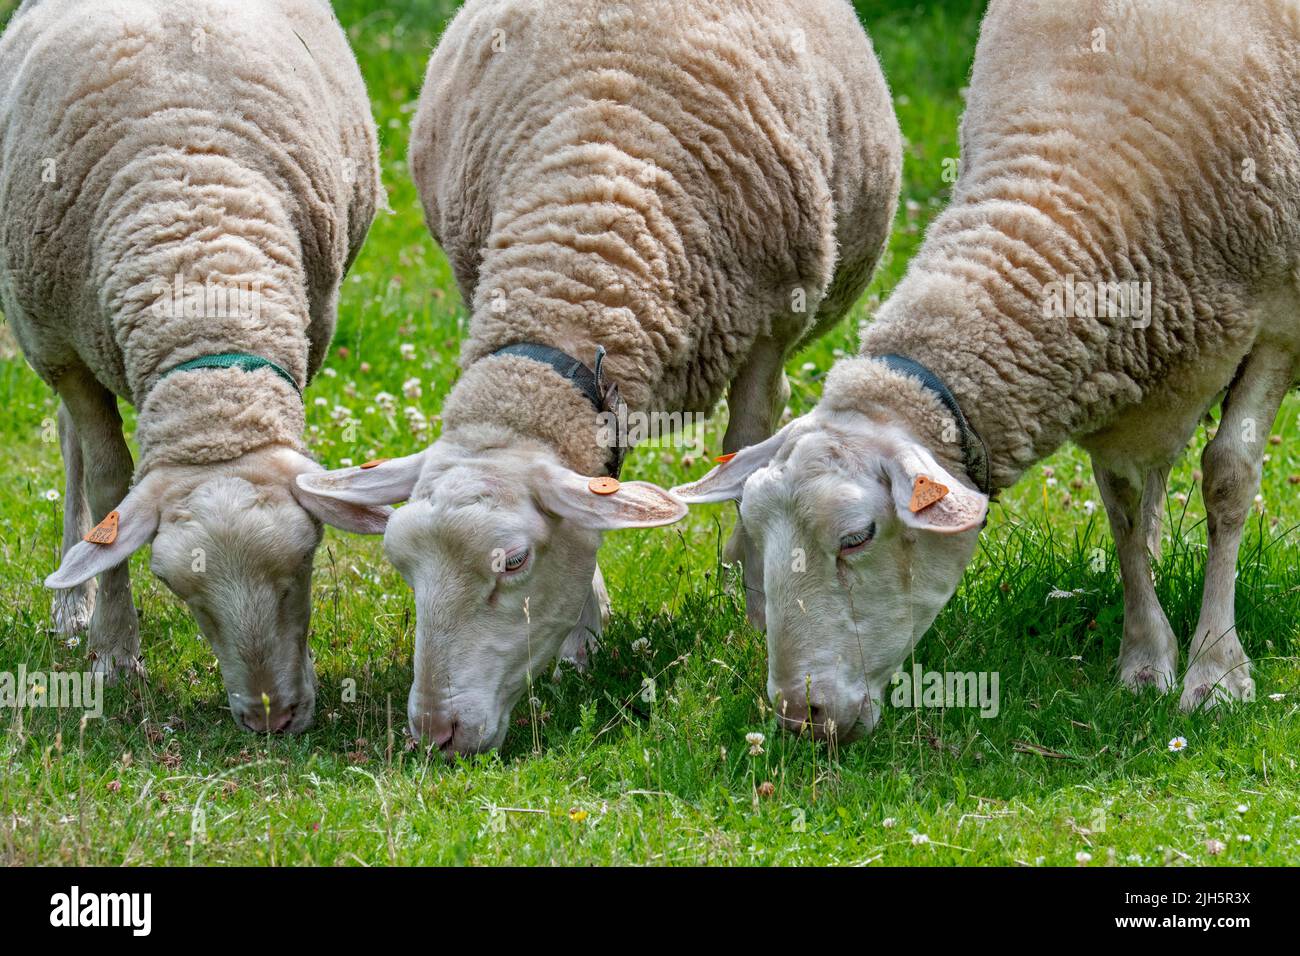 Three tagged white dairy sheep grazing grass in meadow / field / grassland at farm Stock Photo